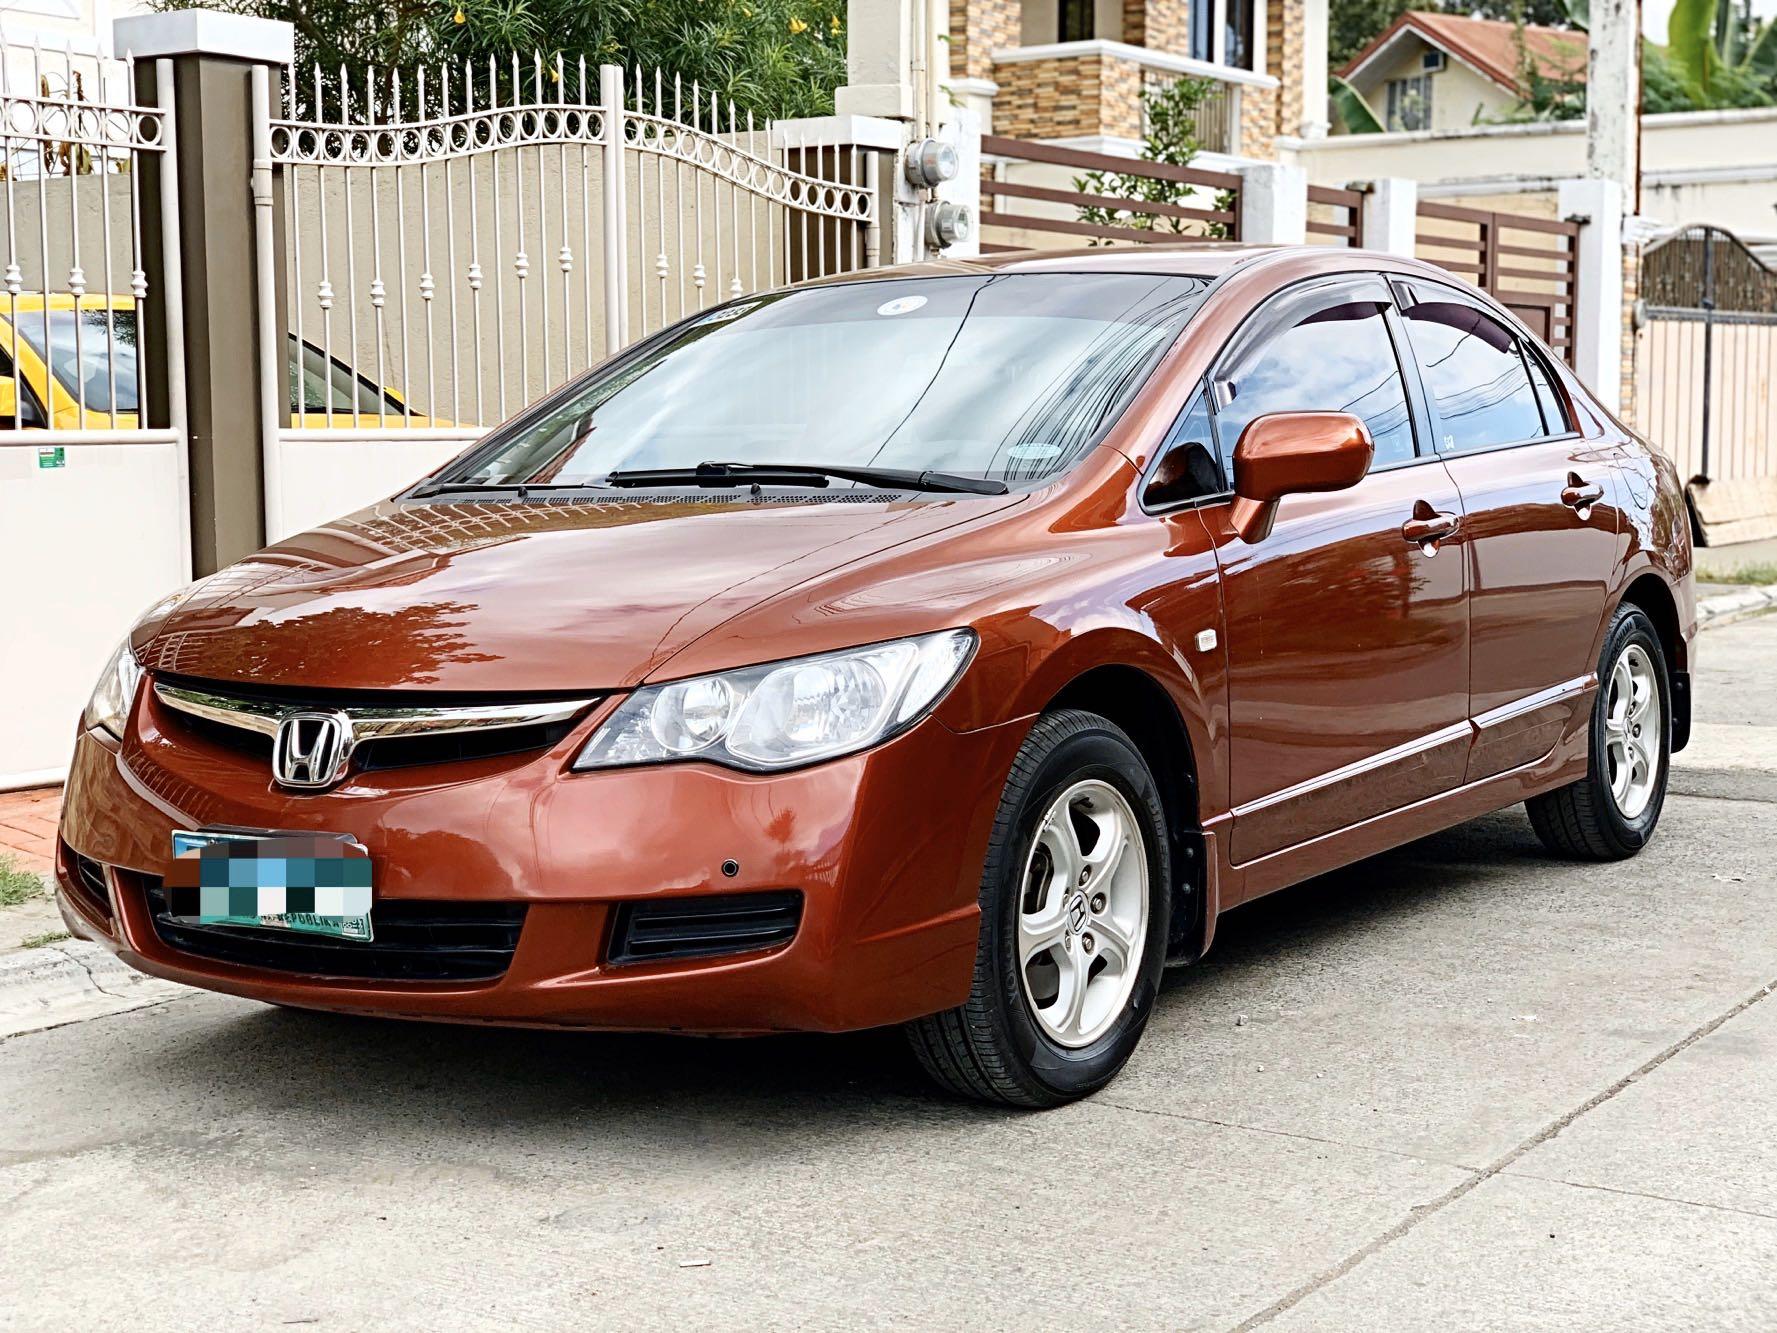 Honda Civic 1.8 FD Auto, Cars for Sale, Used Cars on Carousell